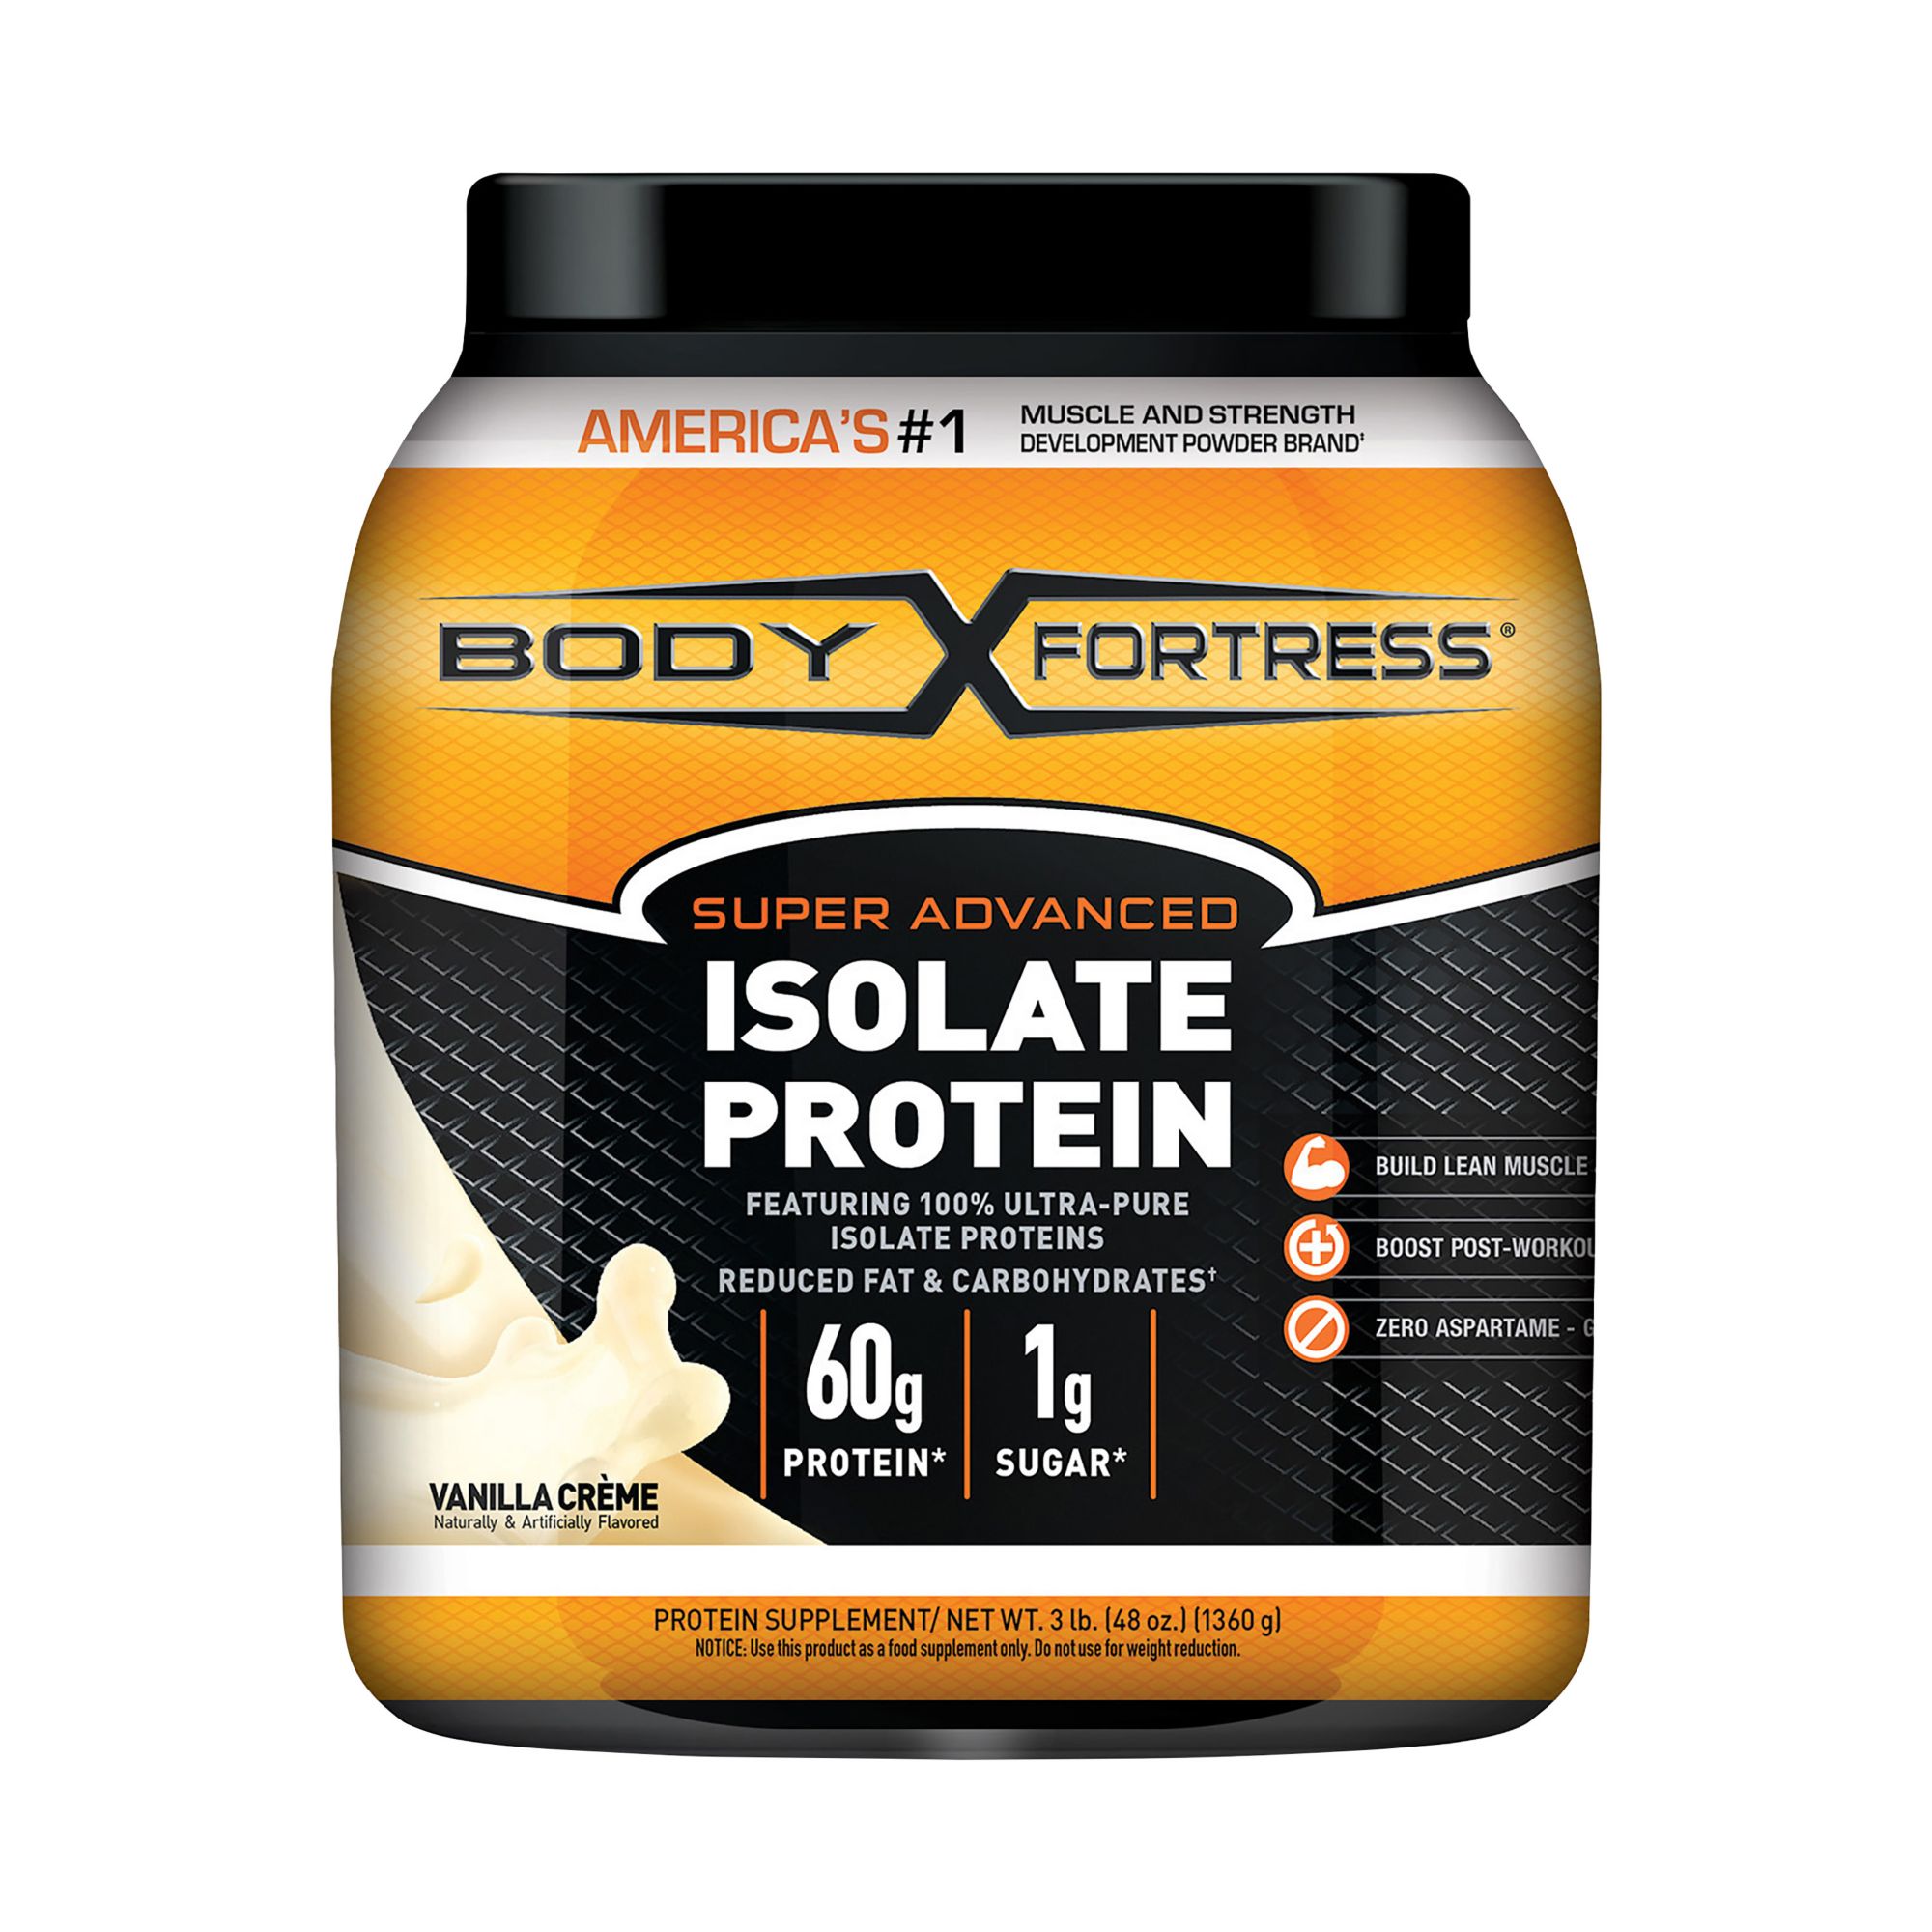 Is Protein Powder FSA Eligible if It's for Weight Loss?